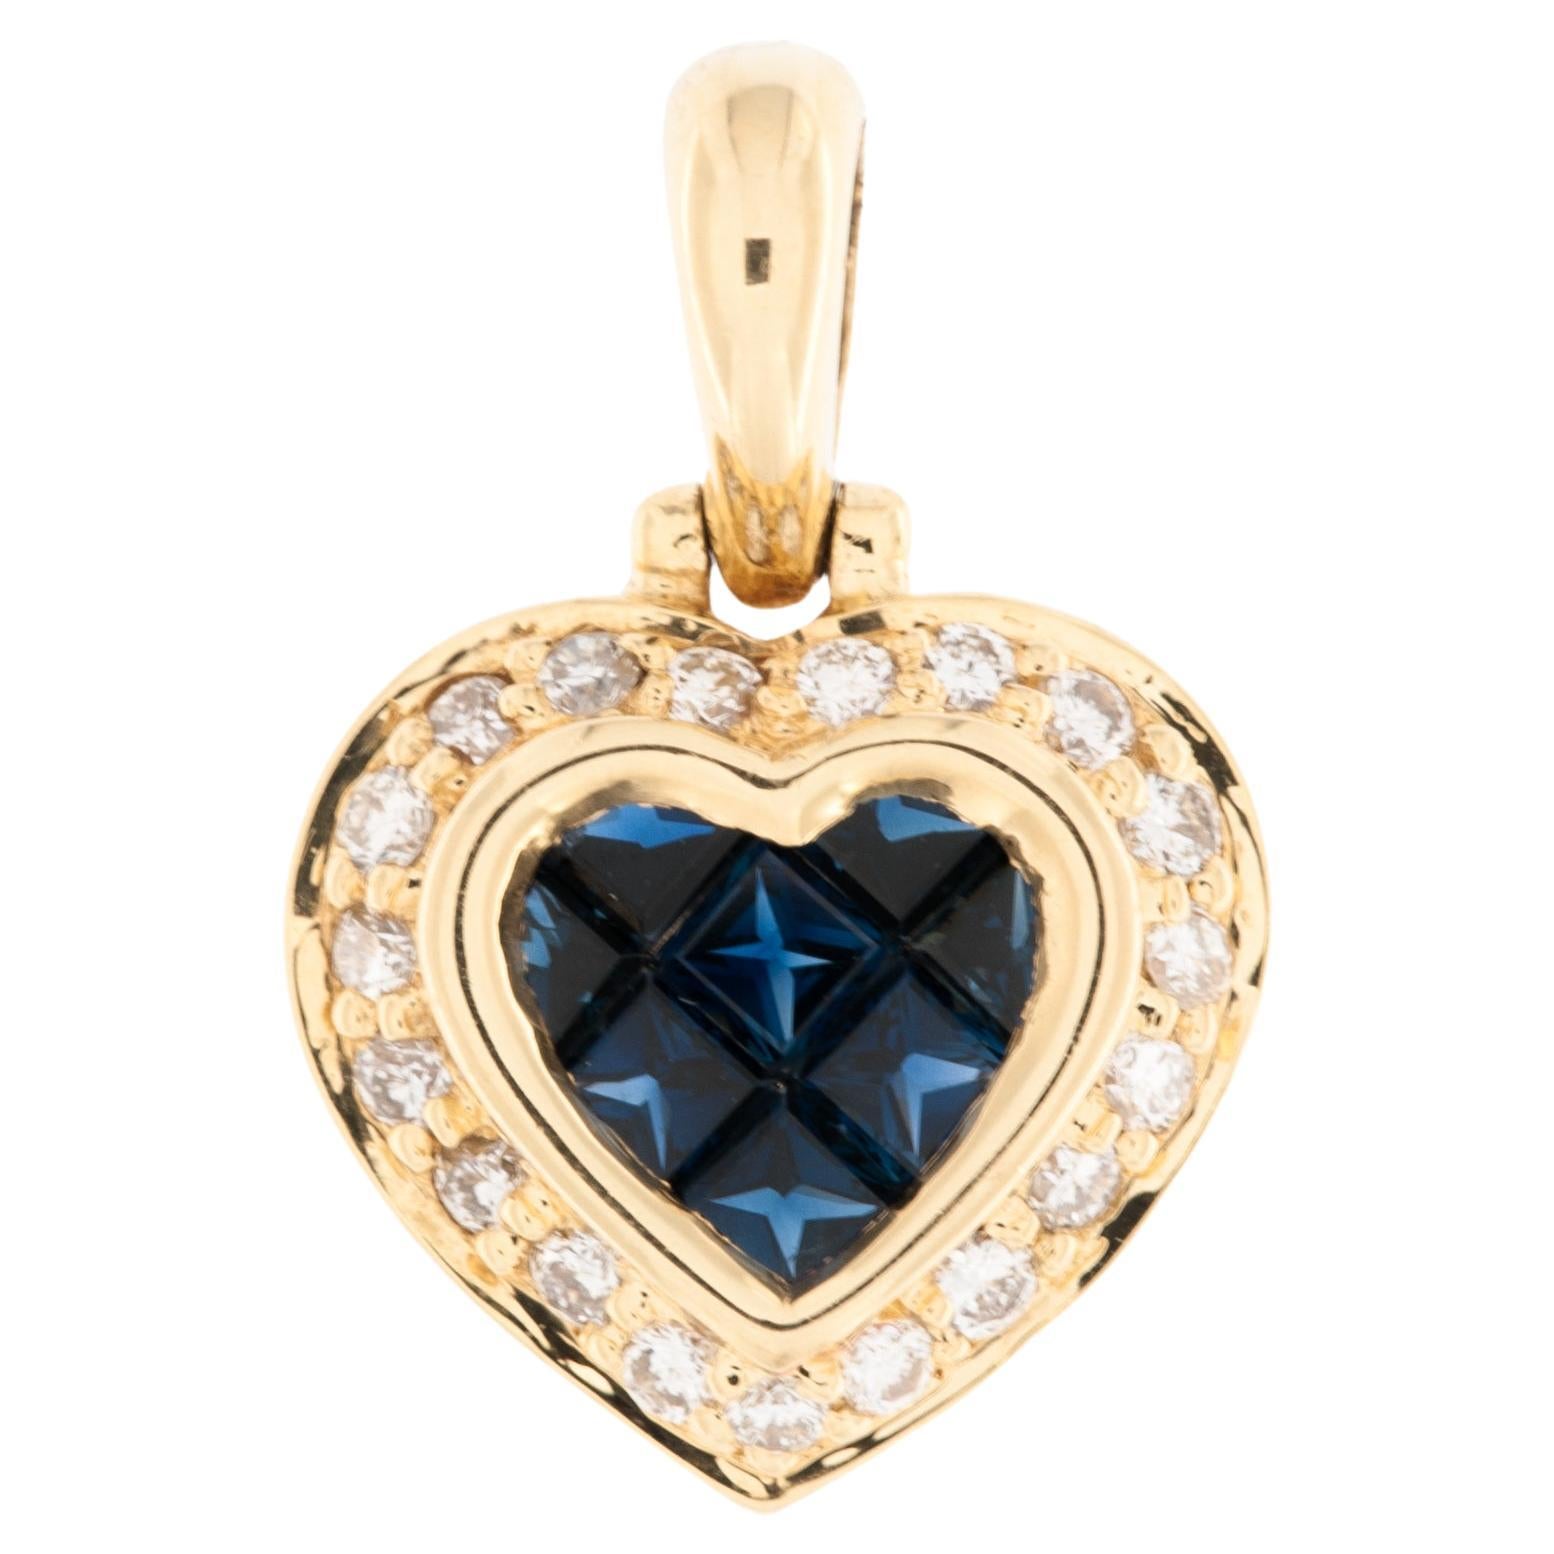 Vintage French Diamonds and Sapphires Heart Pendant Yellow Gold